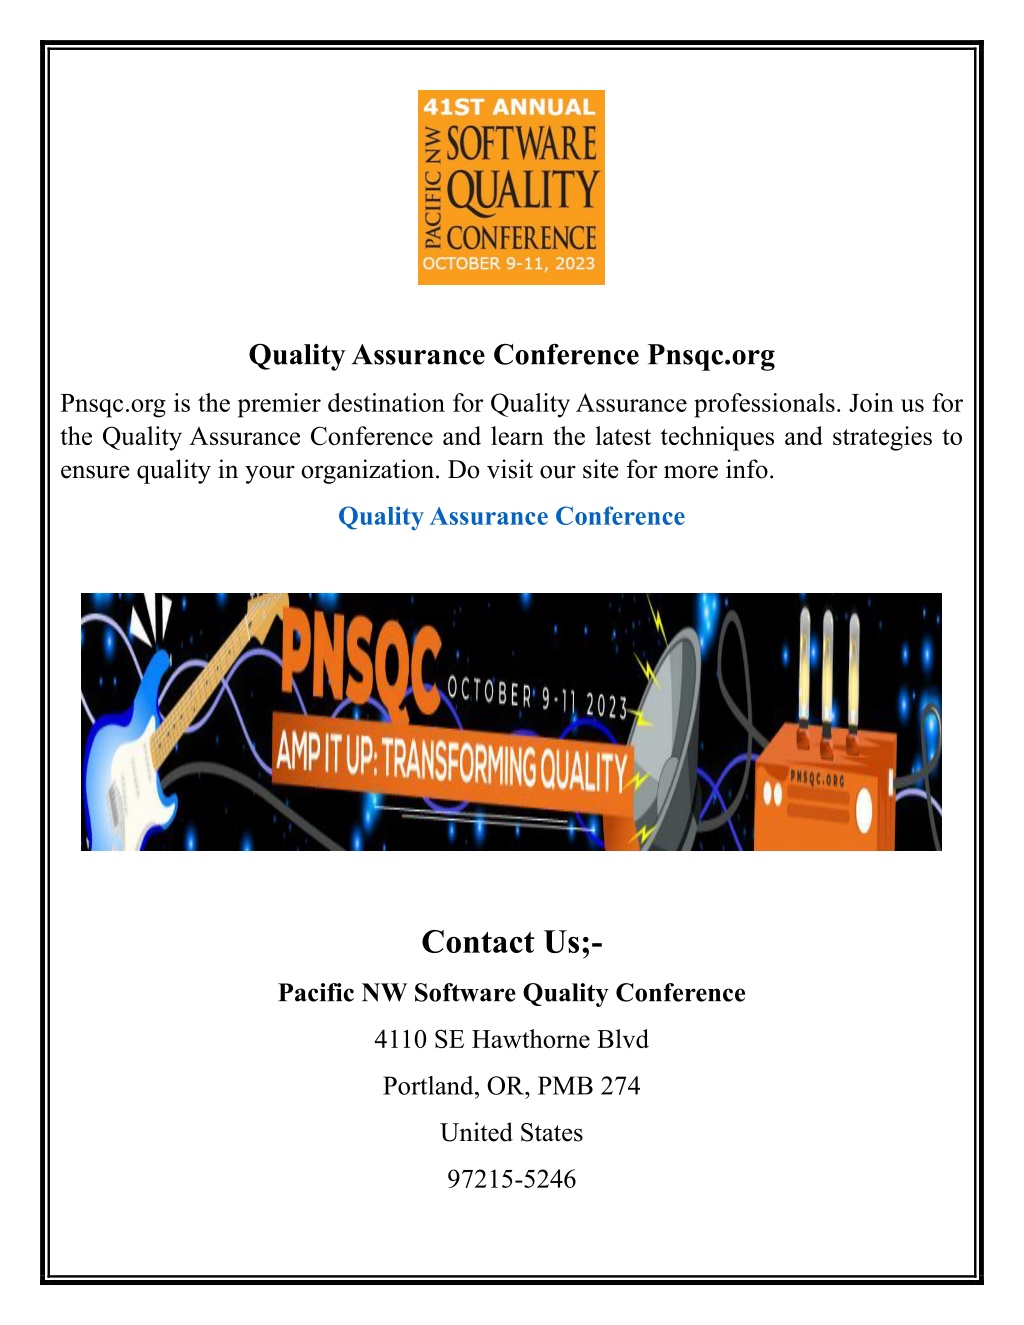 PPT Quality Assurance Conference PowerPoint Presentation